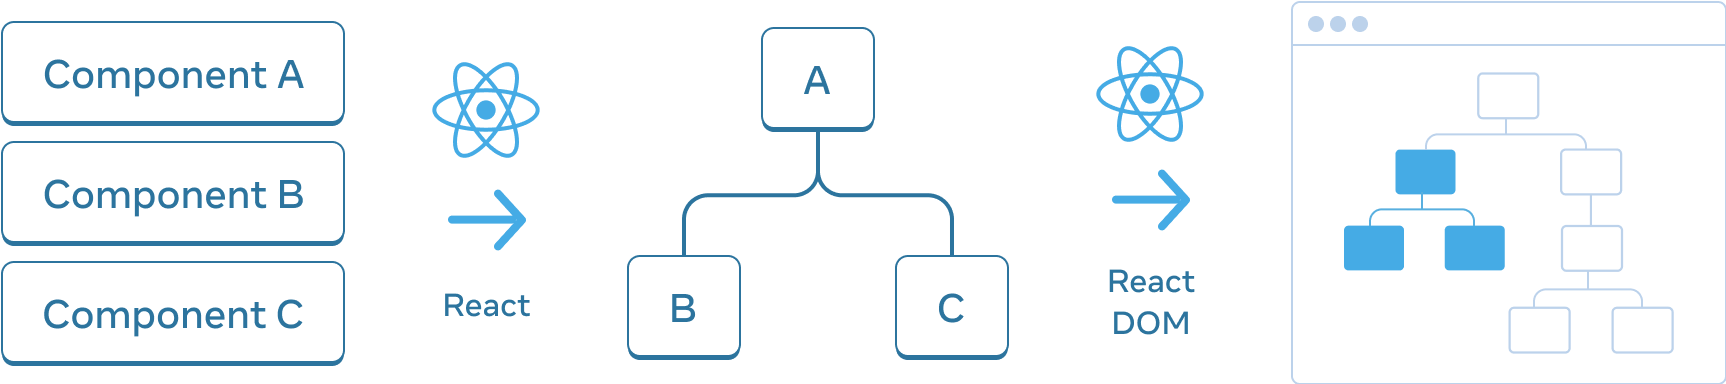 Diagram with three sections arranged horizontally. In the first section, there are three rectangles stacked vertically, with labels 'Component A', 'Component B', and 'Component C'. Transitioning to the next pane is an arrow with the React logo on top labeled 'React'. The middle section contains a tree of components, with the root labeled 'A' and two children labeled 'B' and 'C'. The next section is again transitioned using an arrow with the React logo on top labeled 'React'. The third and final section is a wireframe of a browser, containing a tree of 8 nodes, which has only a subset highlighted (indicating the subtree from the middle section).